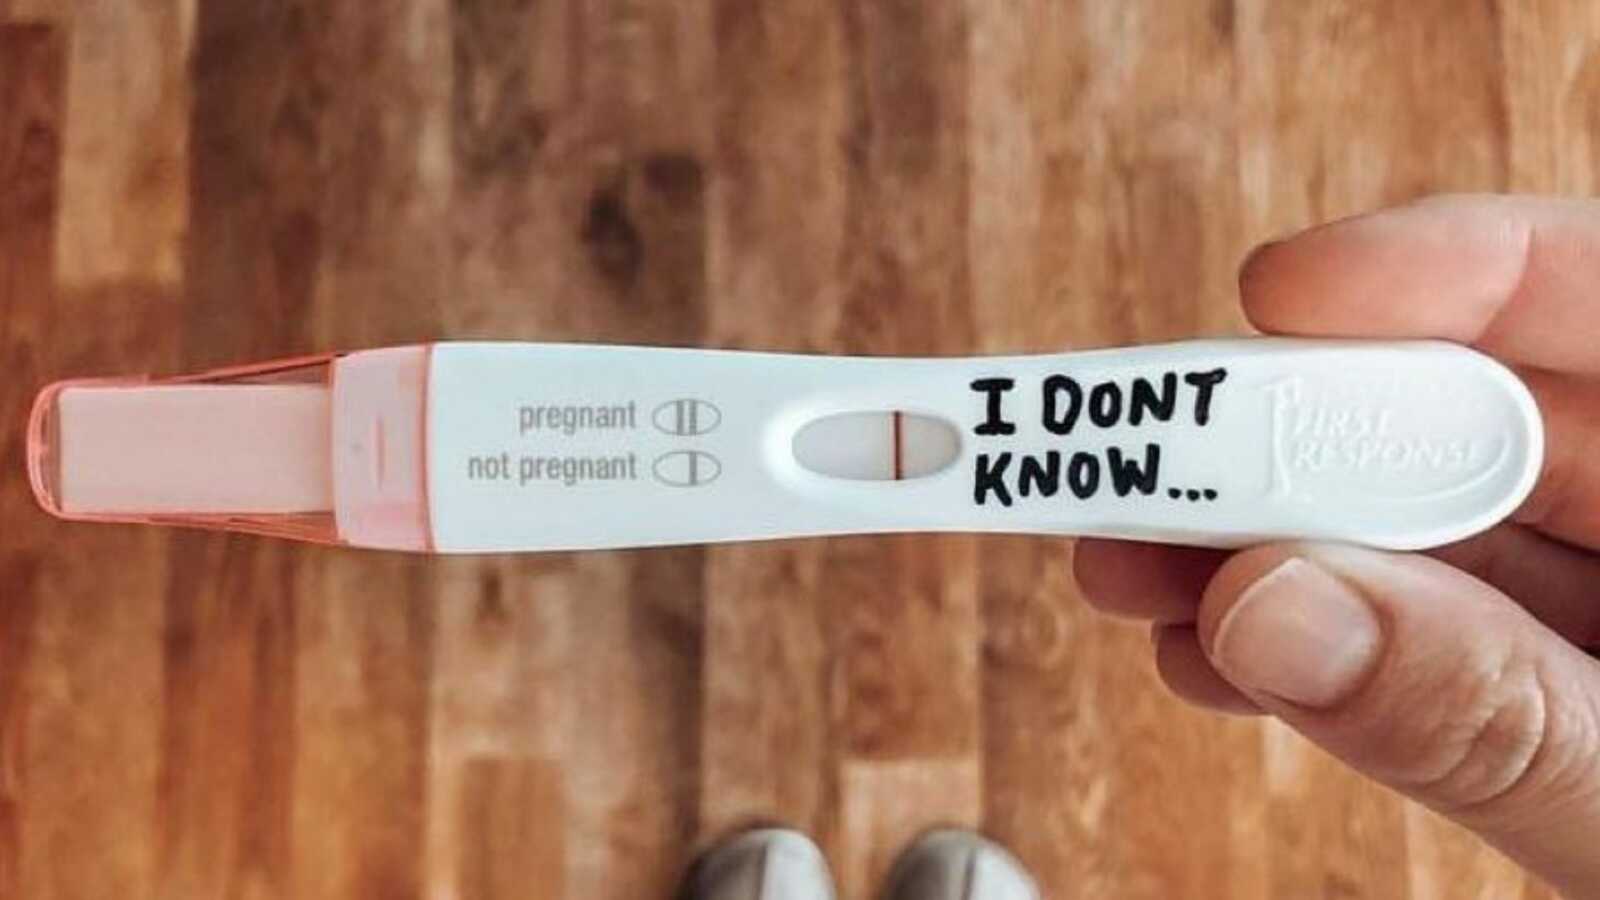 Woman writes 'I don't know' on a negative pregnancy test